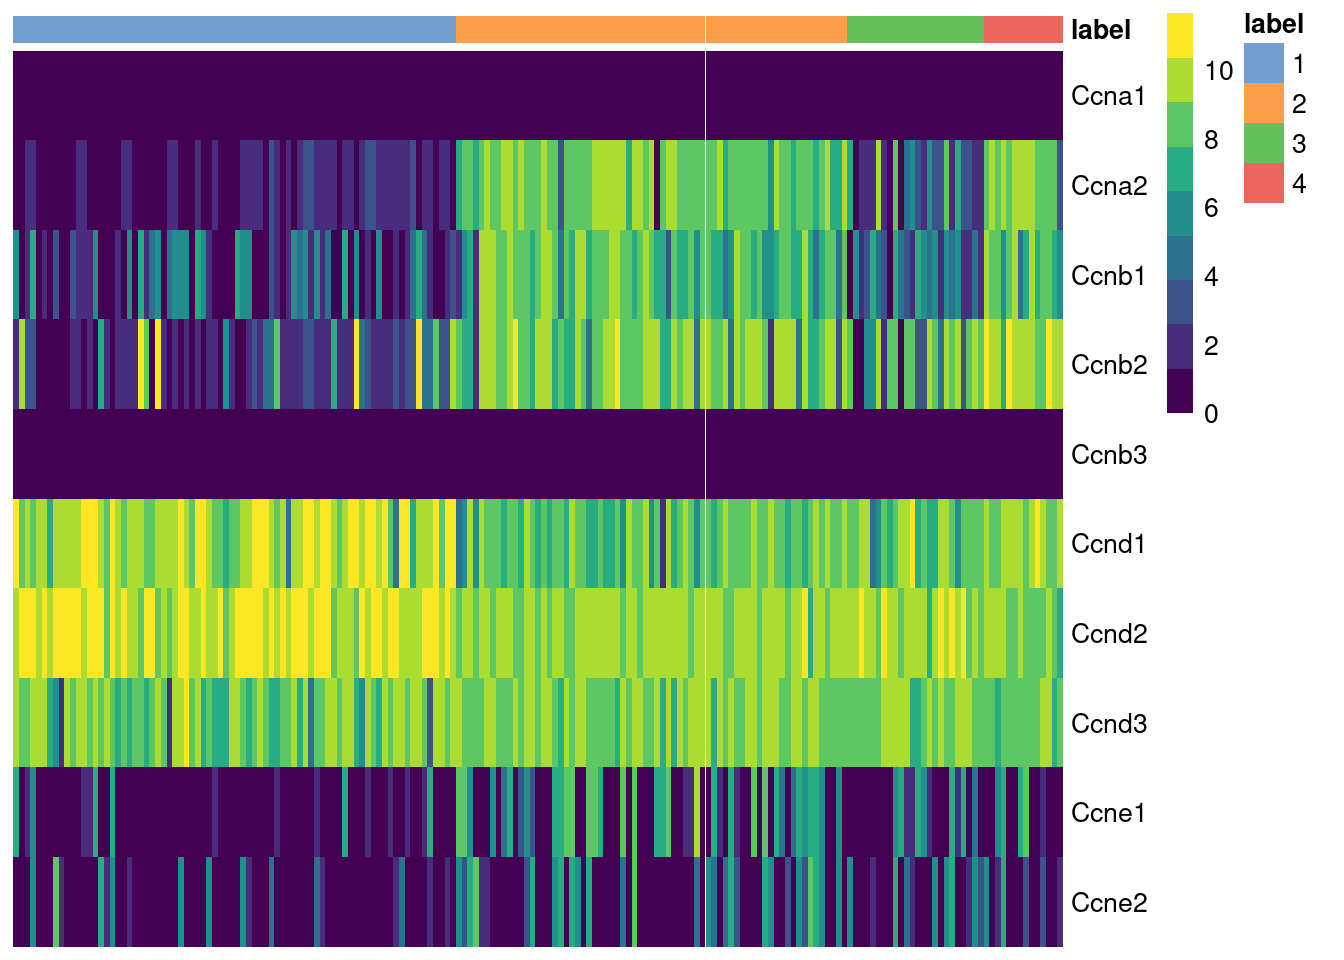 Heatmap of the log-normalized expression values of the cyclin genes in the 416B dataset. Each column represents a cell that is sorted by the cluster of origin.